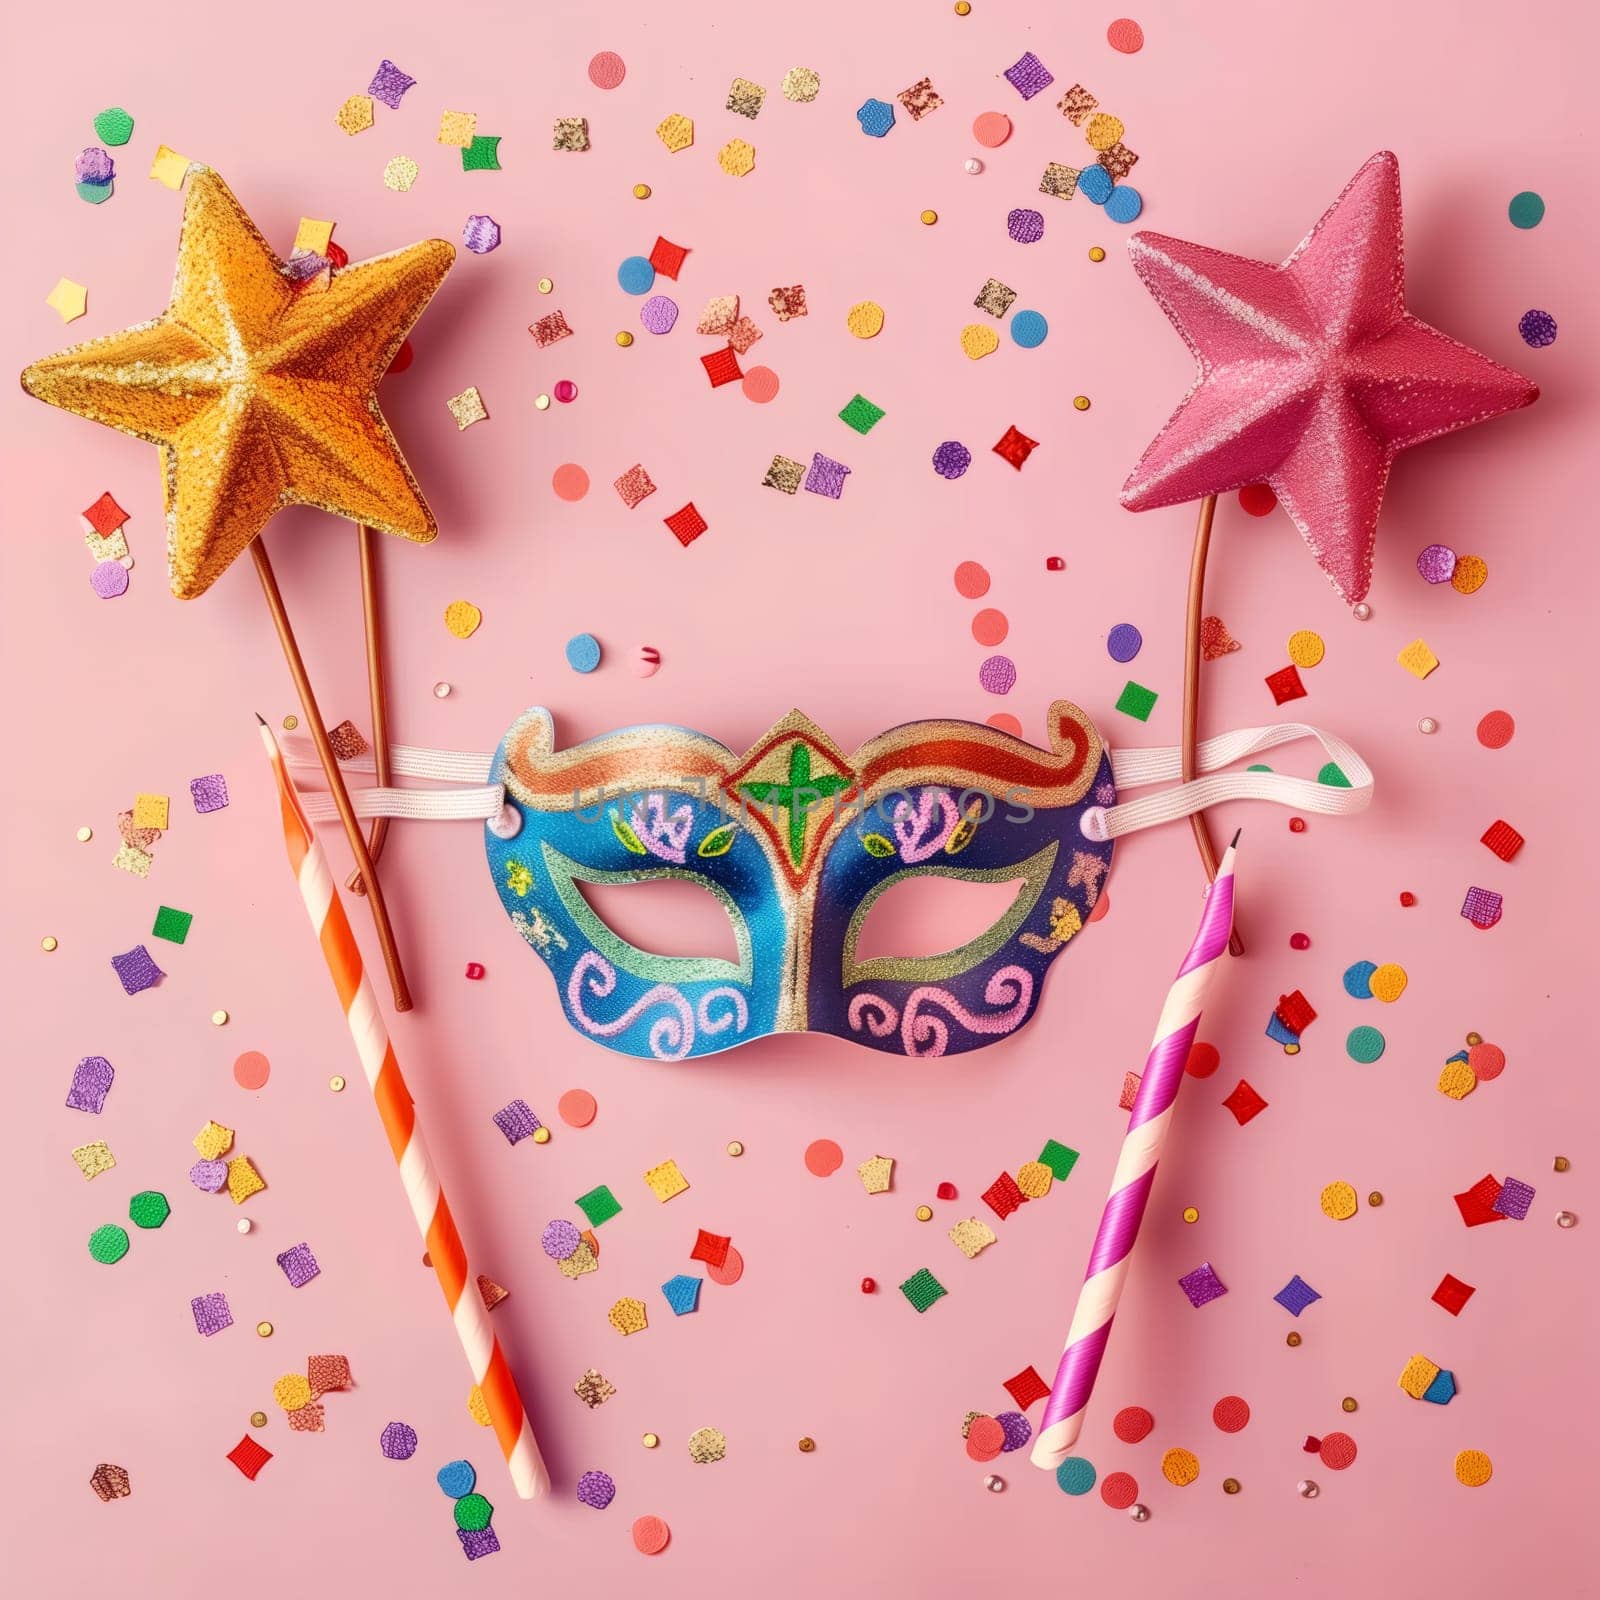 Masquerade mask with candles, stars and confetti on pink. by Nataliya